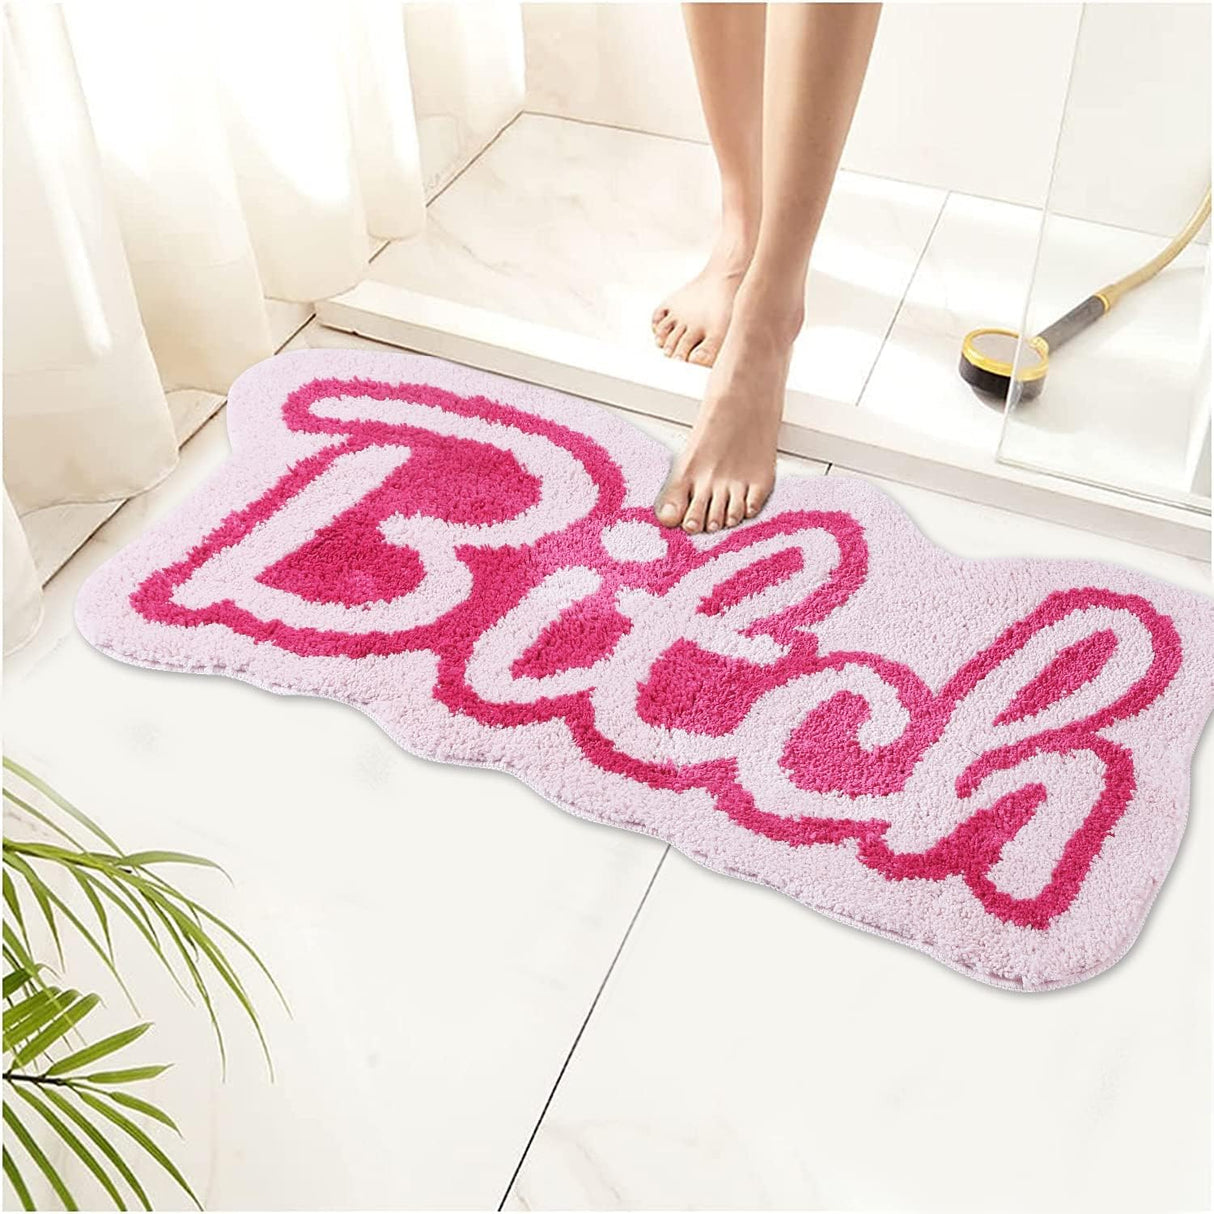 Funny Cute Rugs for Bedroom Bathroom Dorm Kitchen Non Slip Rubber Backed Machine Washable, Swear Words Bitch Funky Cool Rugs Colorful Fluffy Shaggy Bedside Accent Rug 35"x18"(Pink)